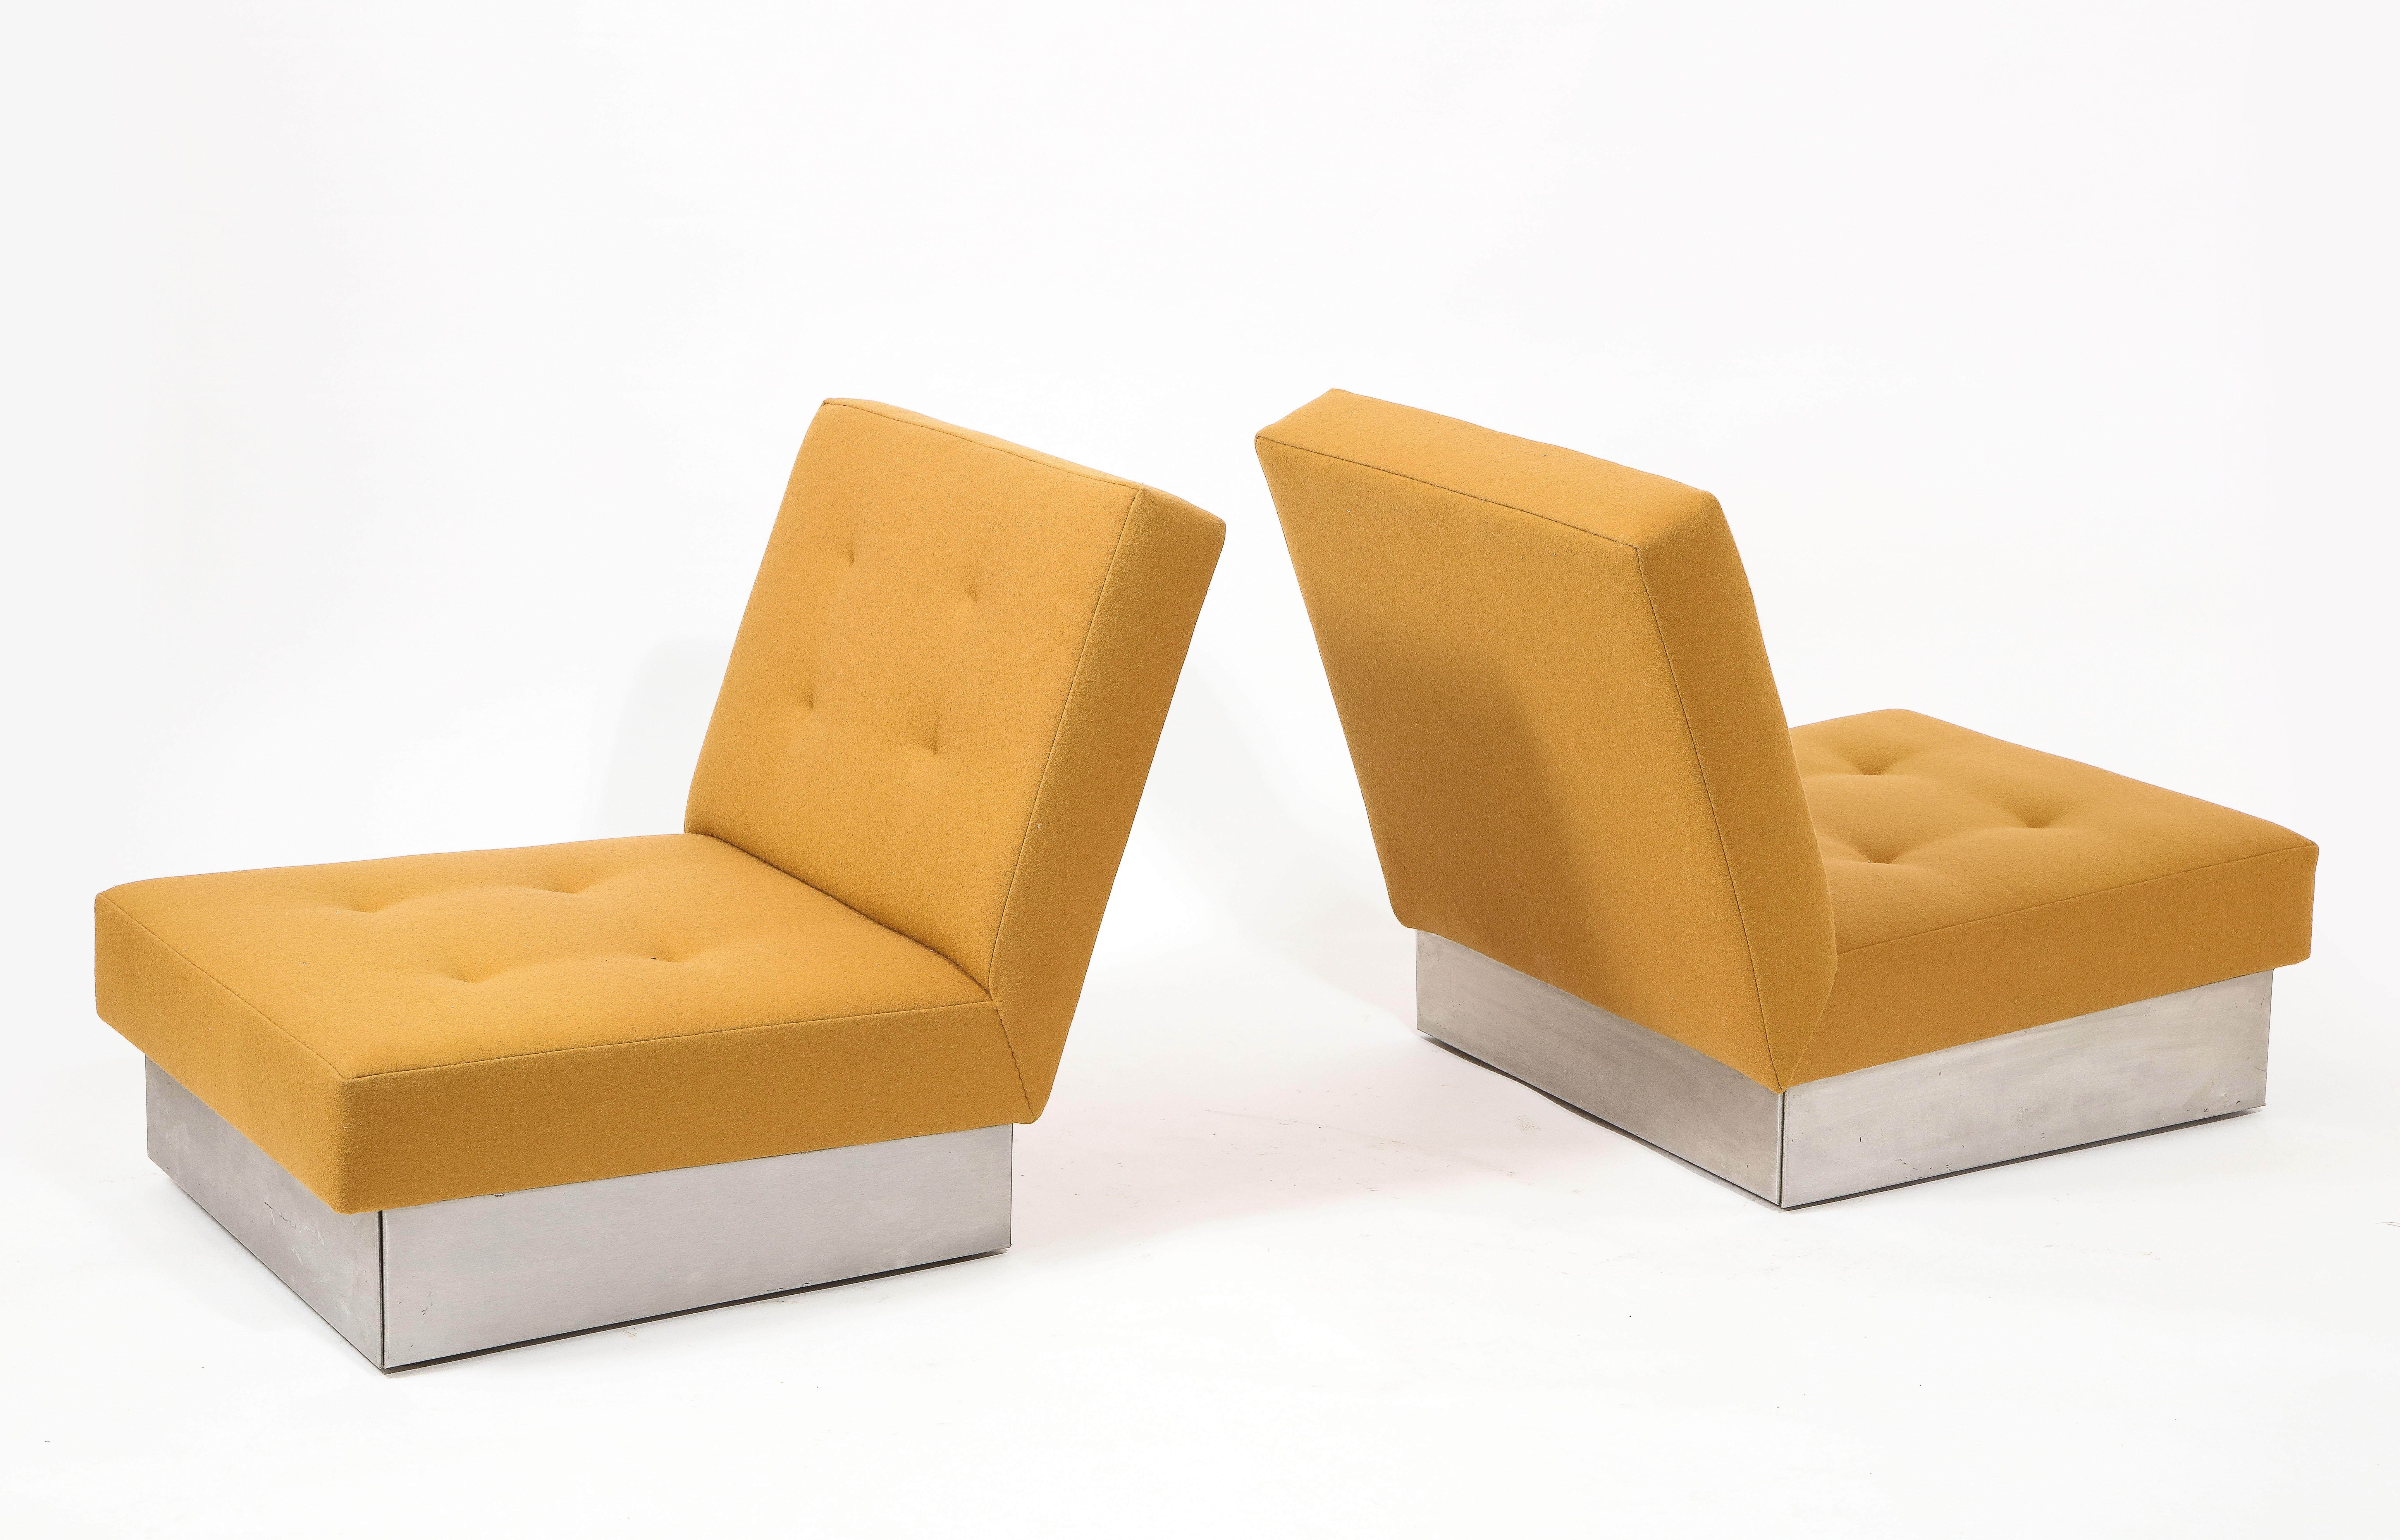 Steel Jacques Charpentier Pair Modernist Slipper Chairs in Mohair, France 1970's For Sale